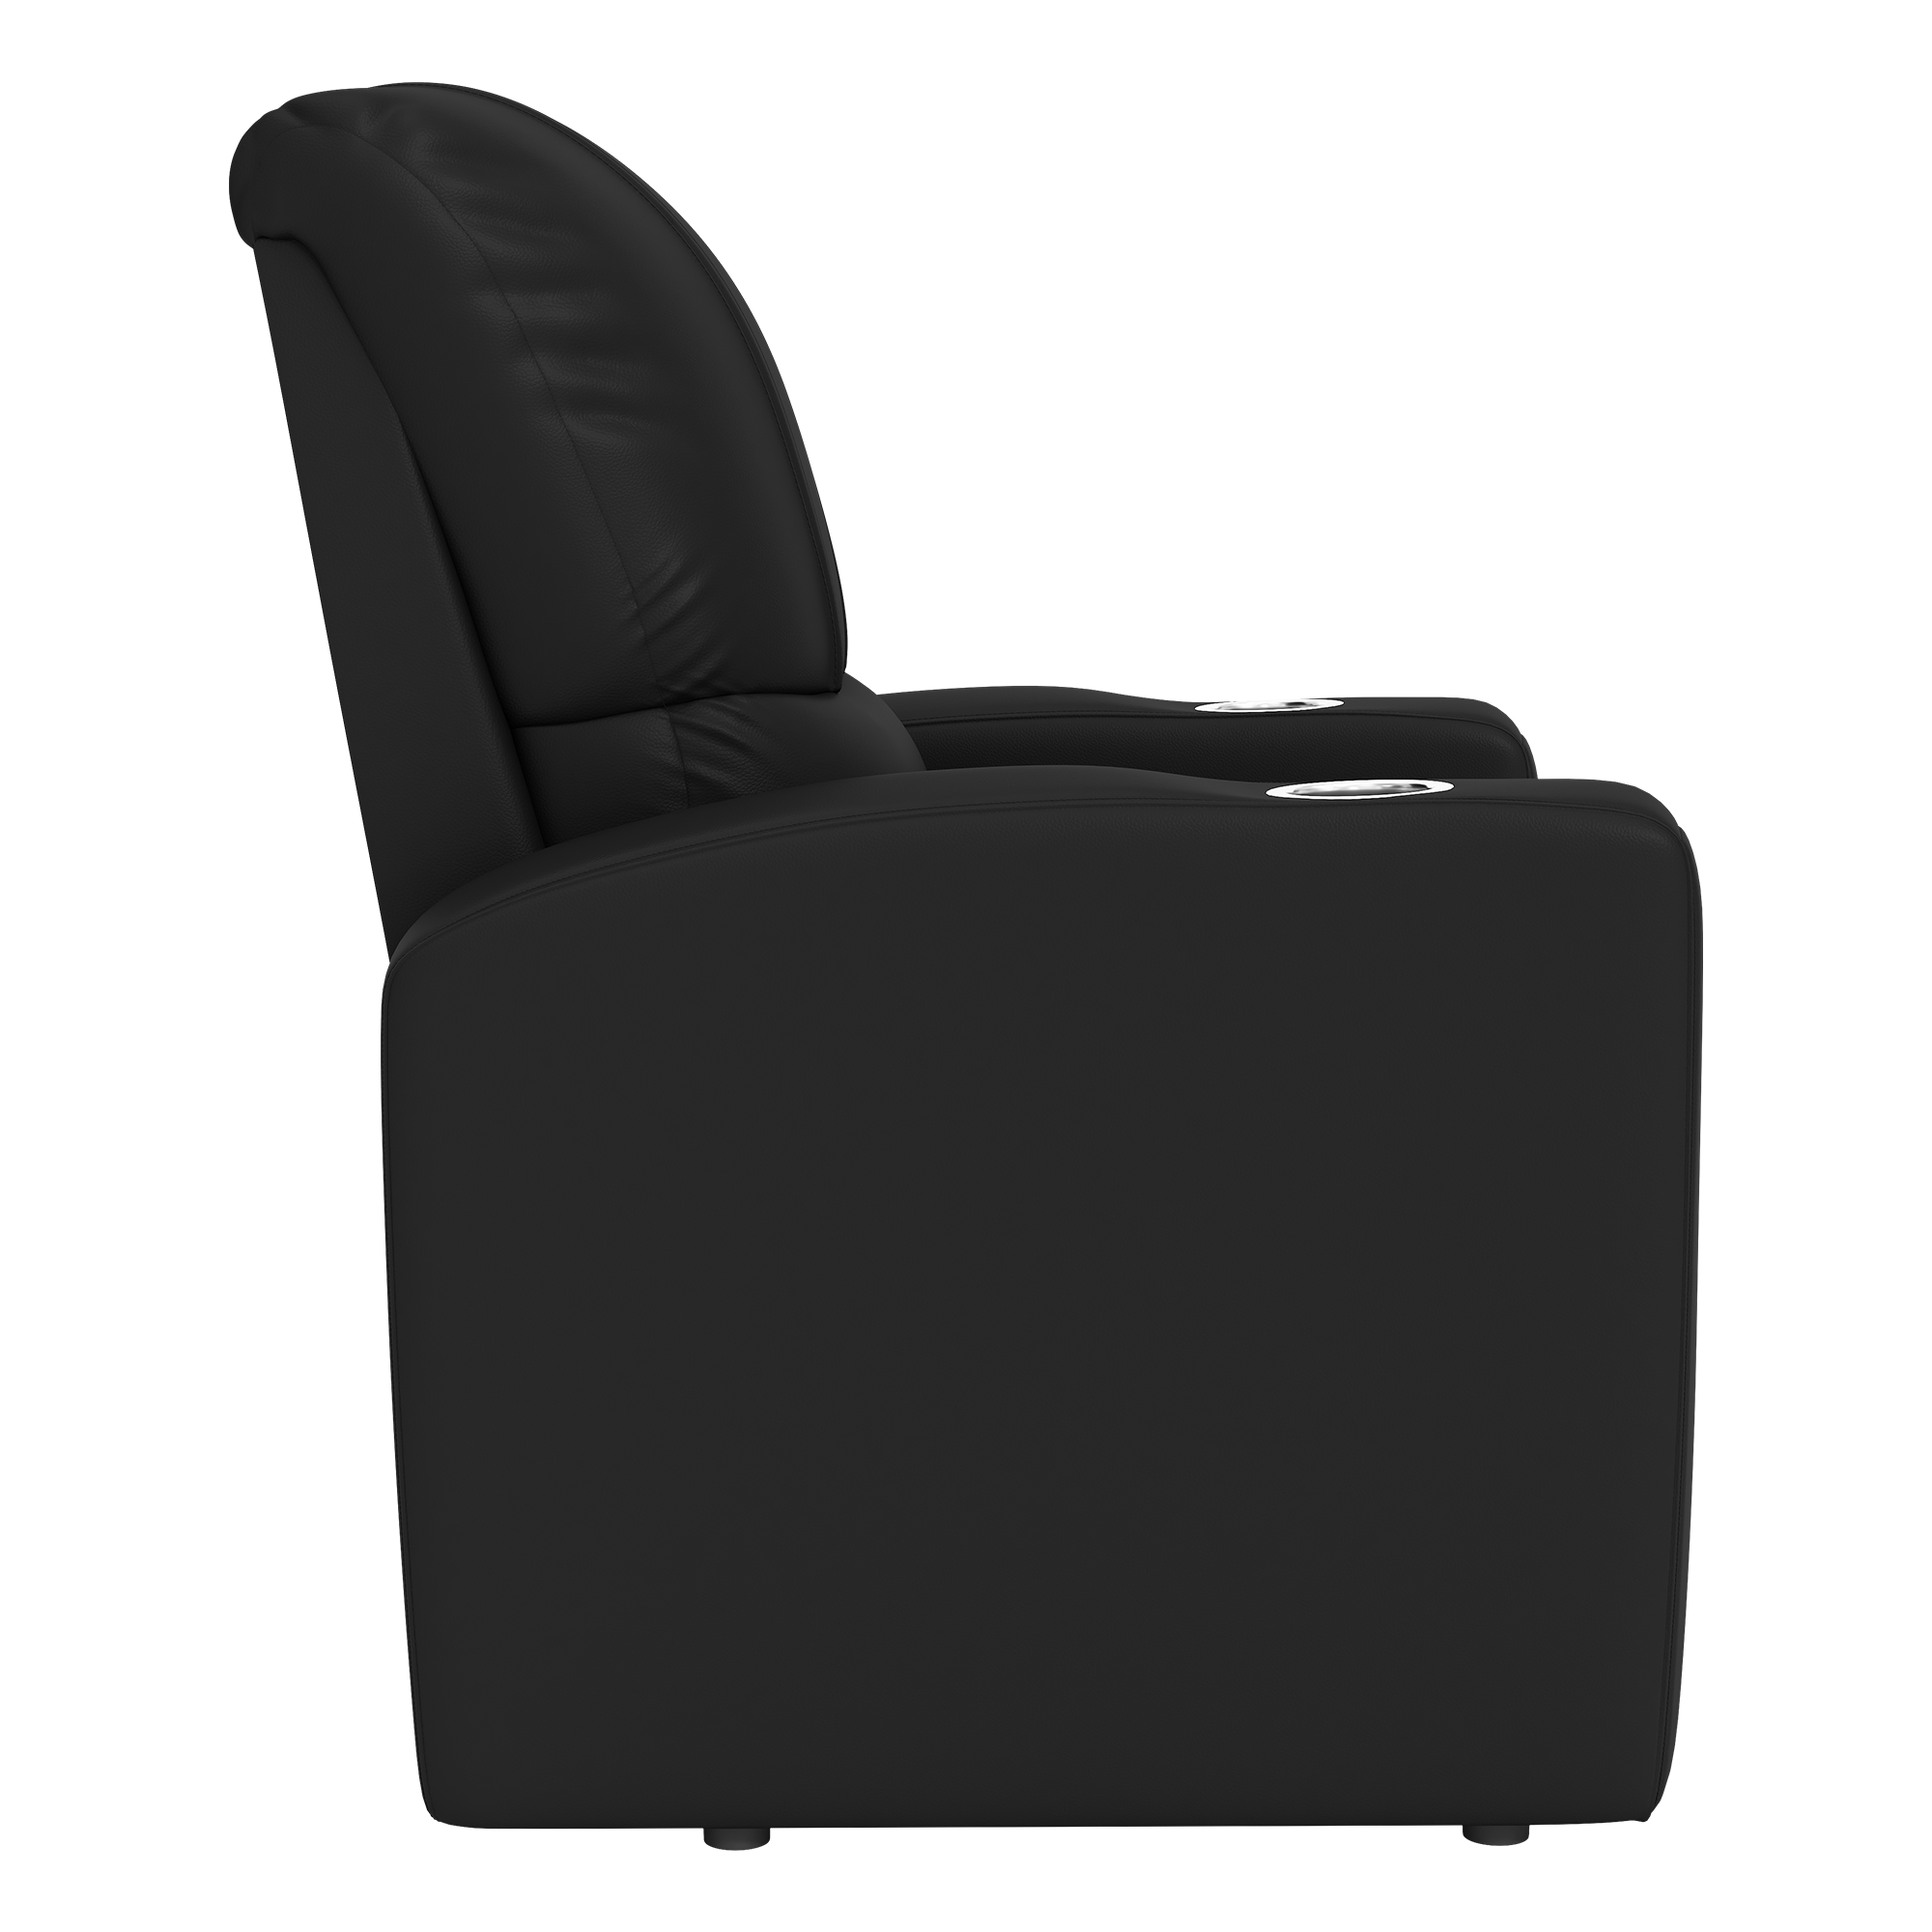 Stealth Recliner with Toronto Blue Jays Cooperstown